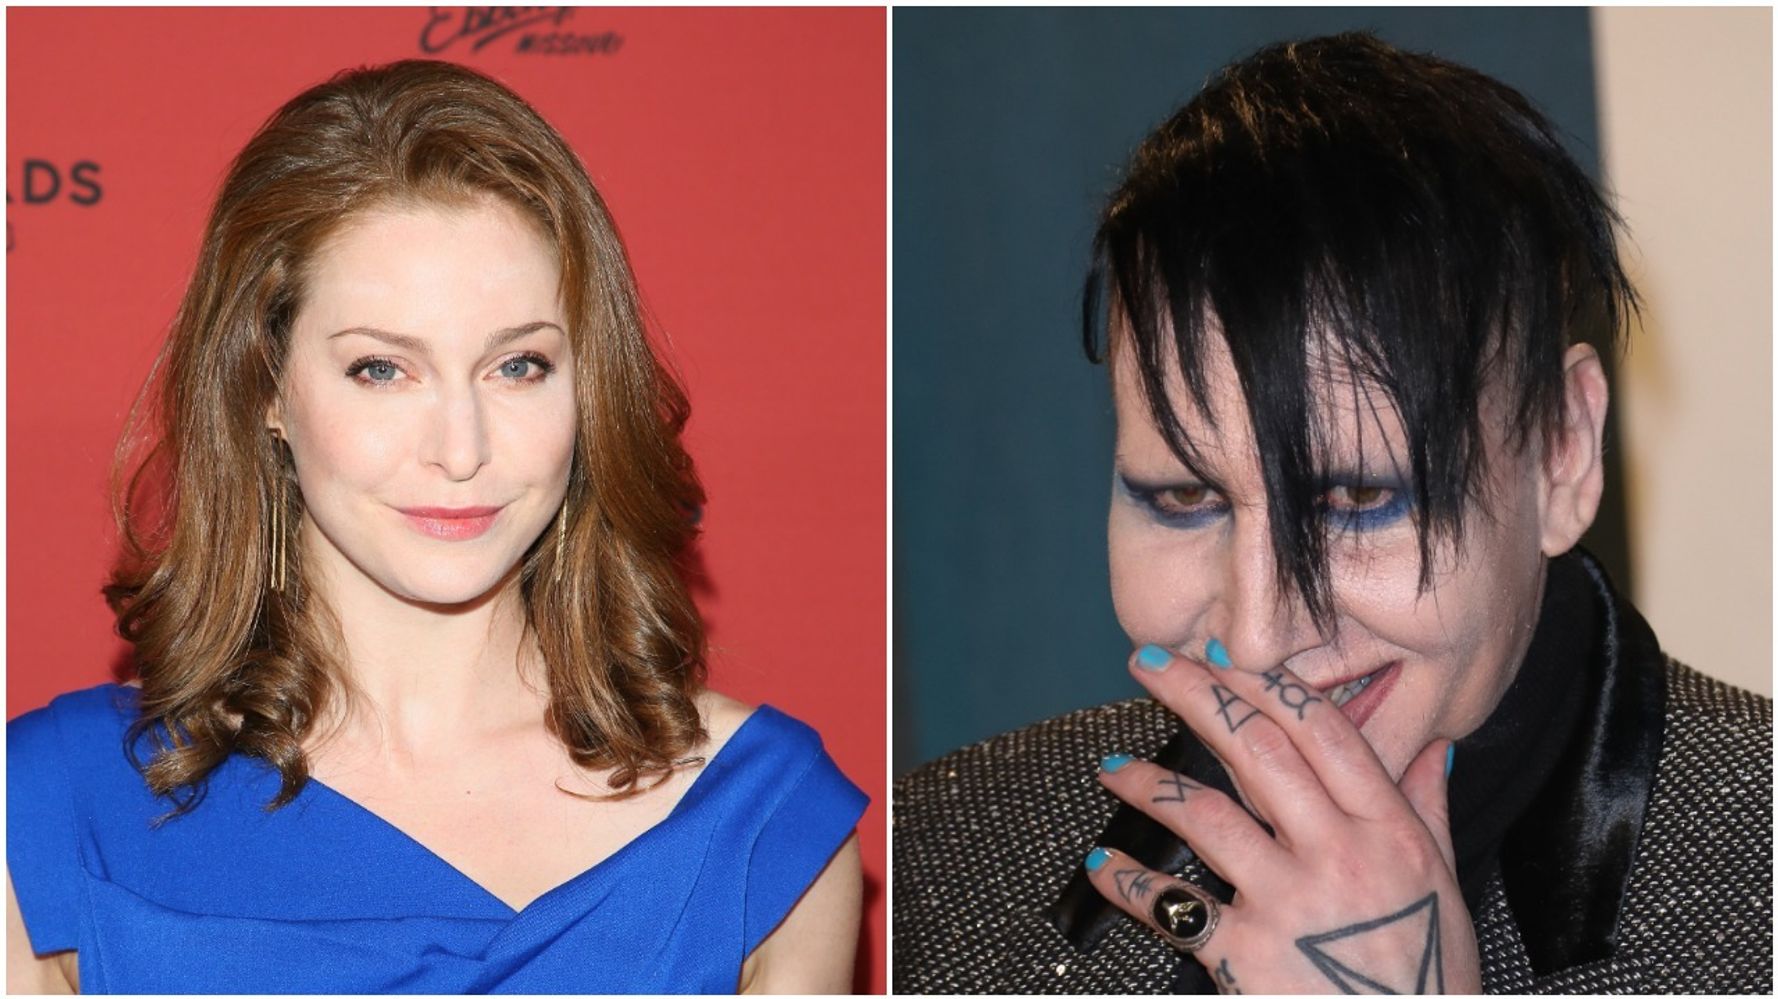 Esme Bianco Sues Marilyn Manson For Sexual, Physical And Emotional Abuse